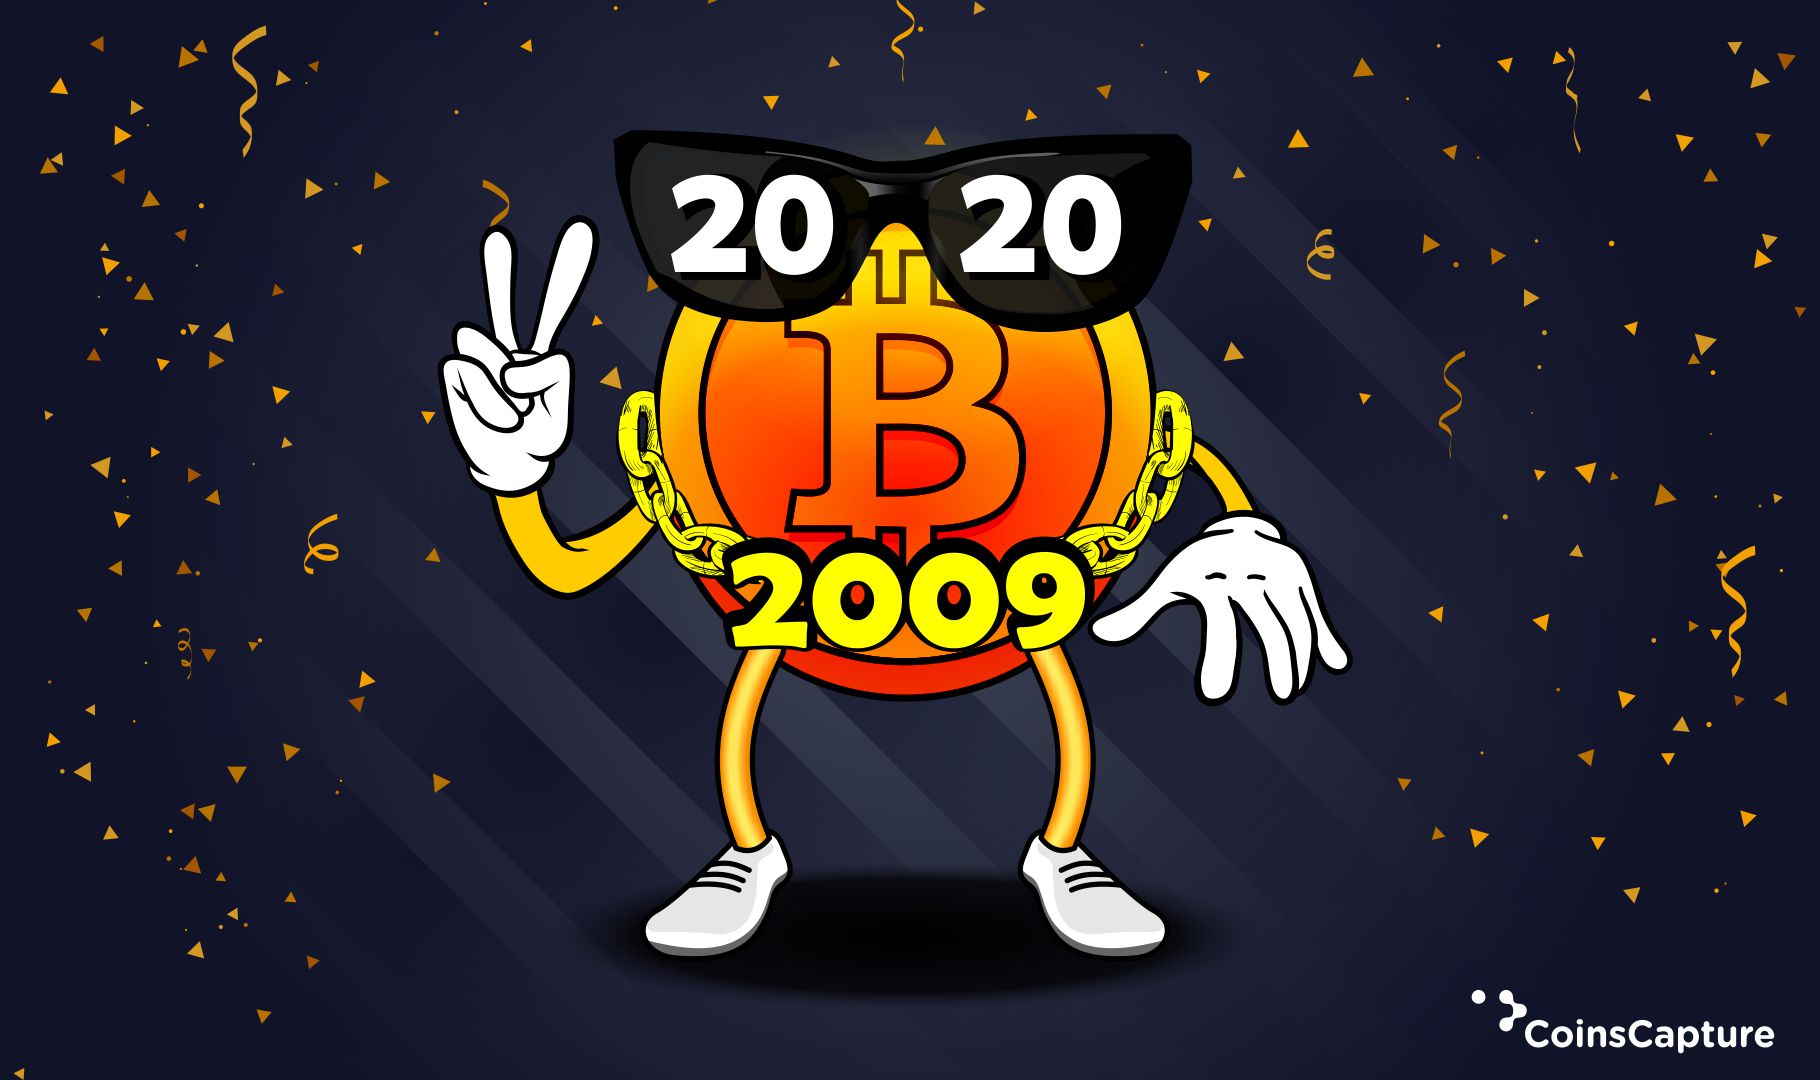 Cryptocurrency - Its Decade, Its Journey!